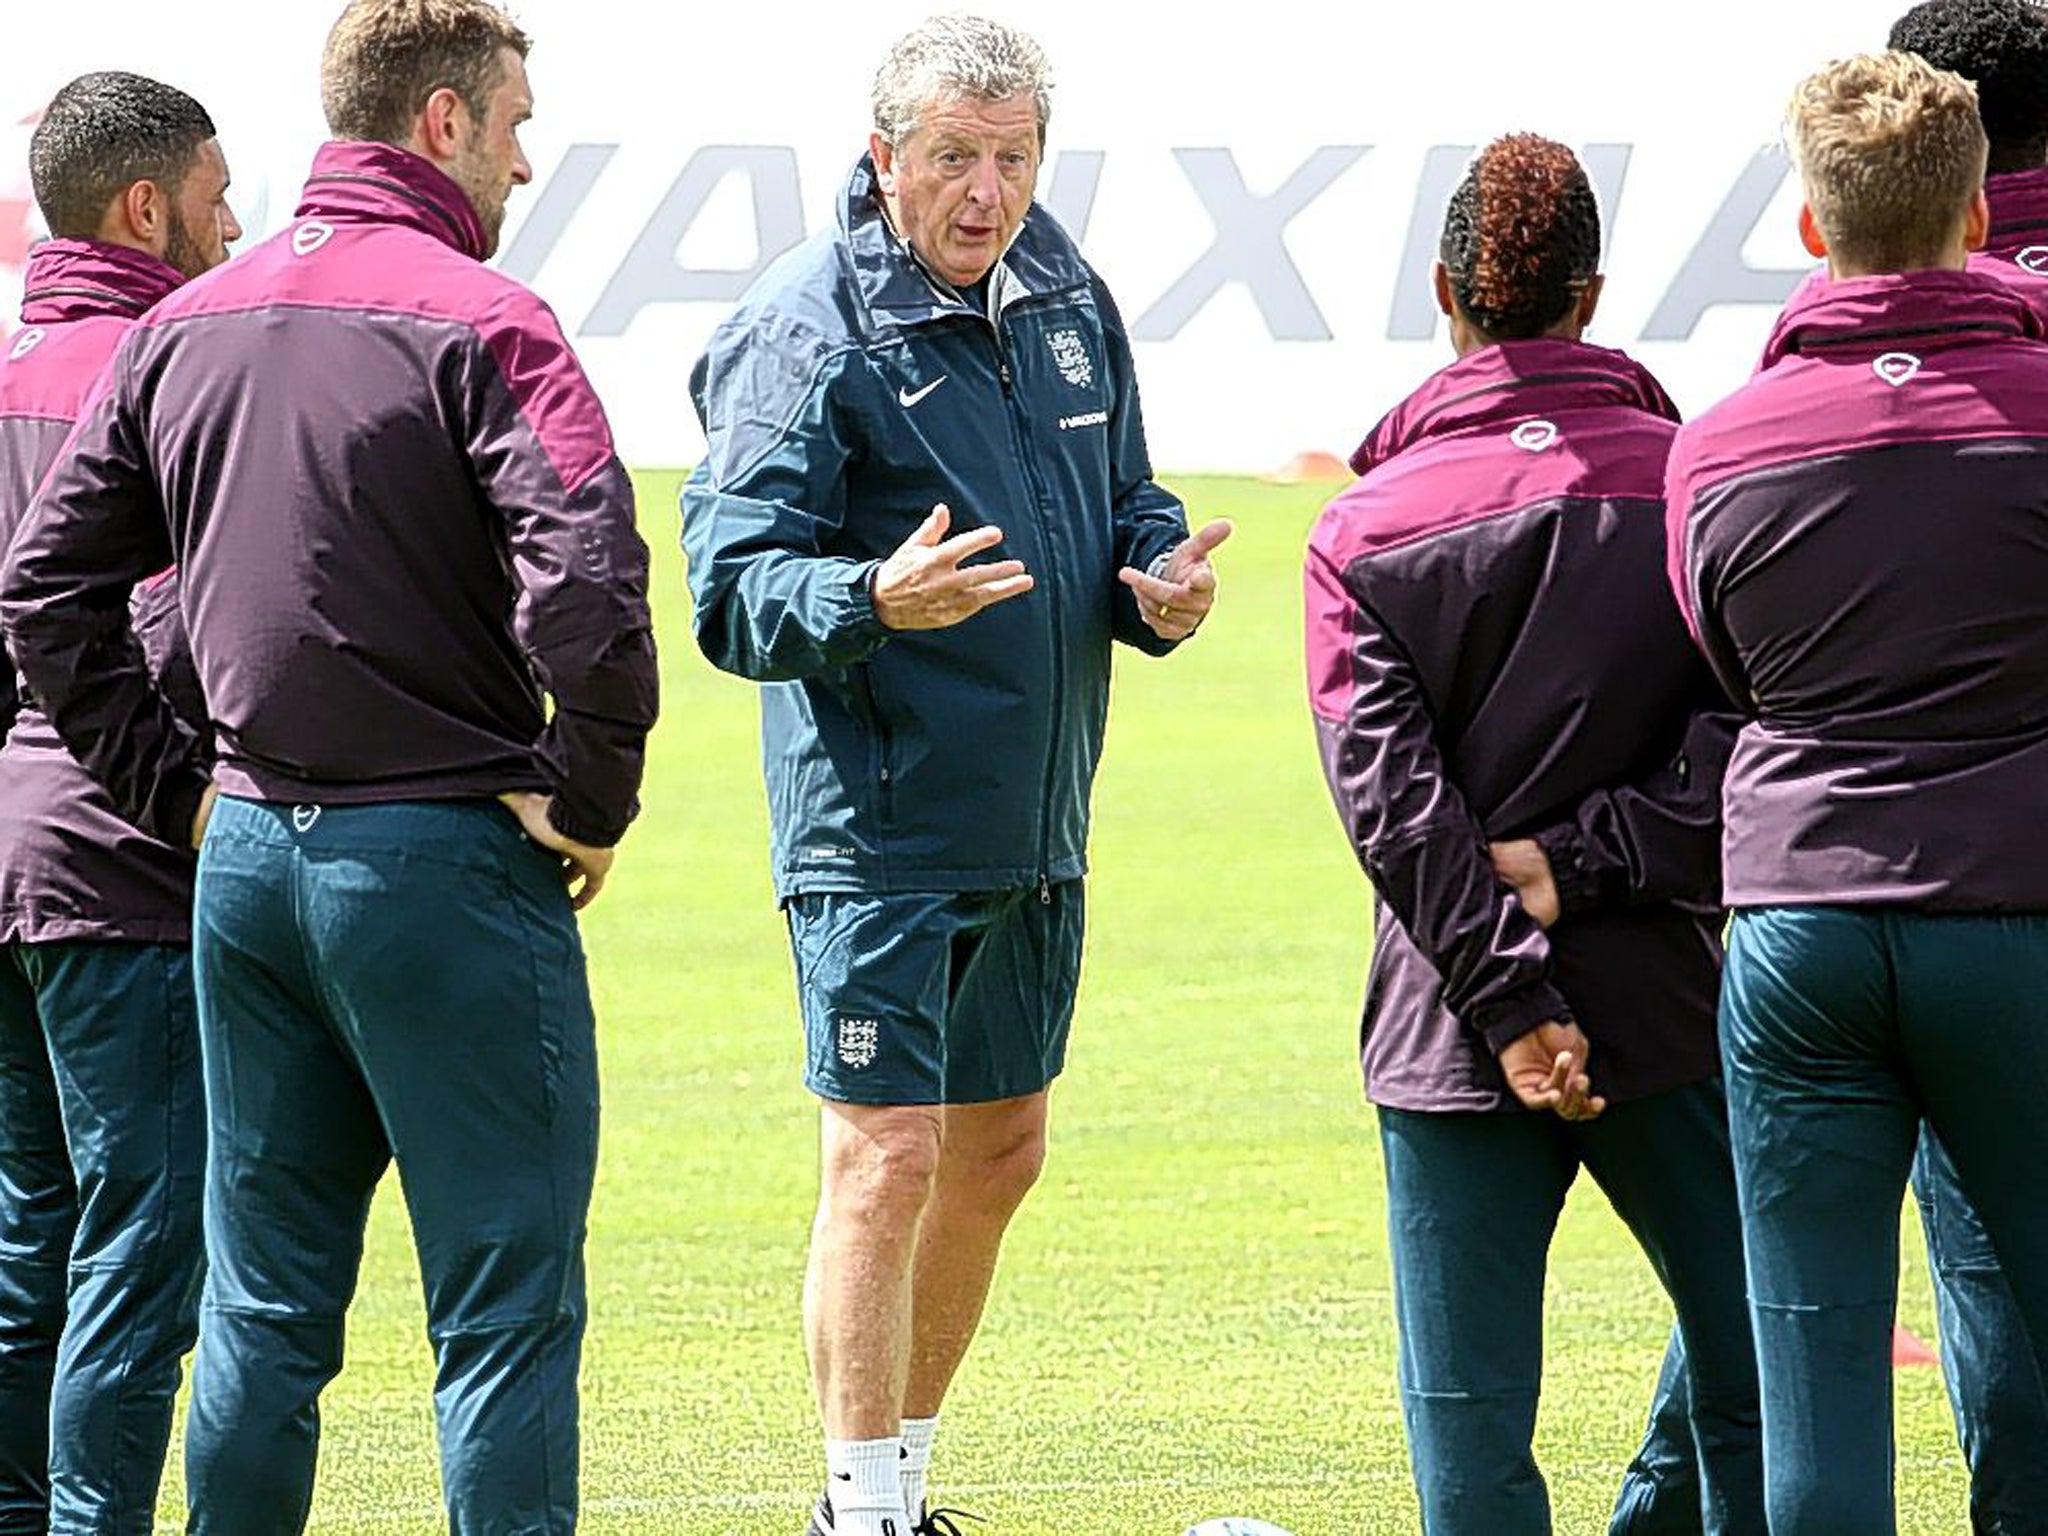 Vying for attention: England’s World Cup hopefuls surround manager Roy Hodgson in Portugal last week